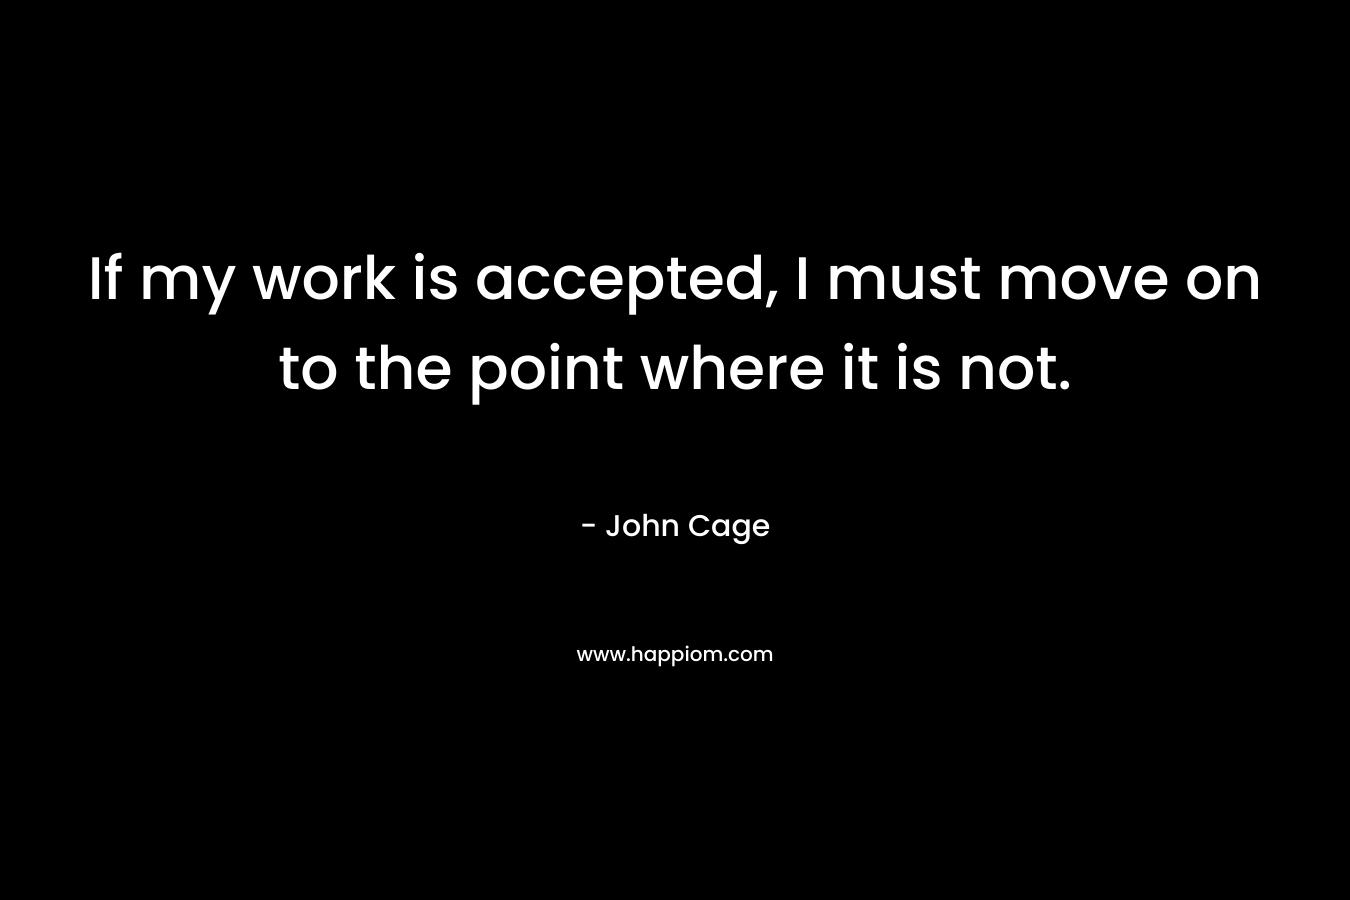 If my work is accepted, I must move on to the point where it is not.